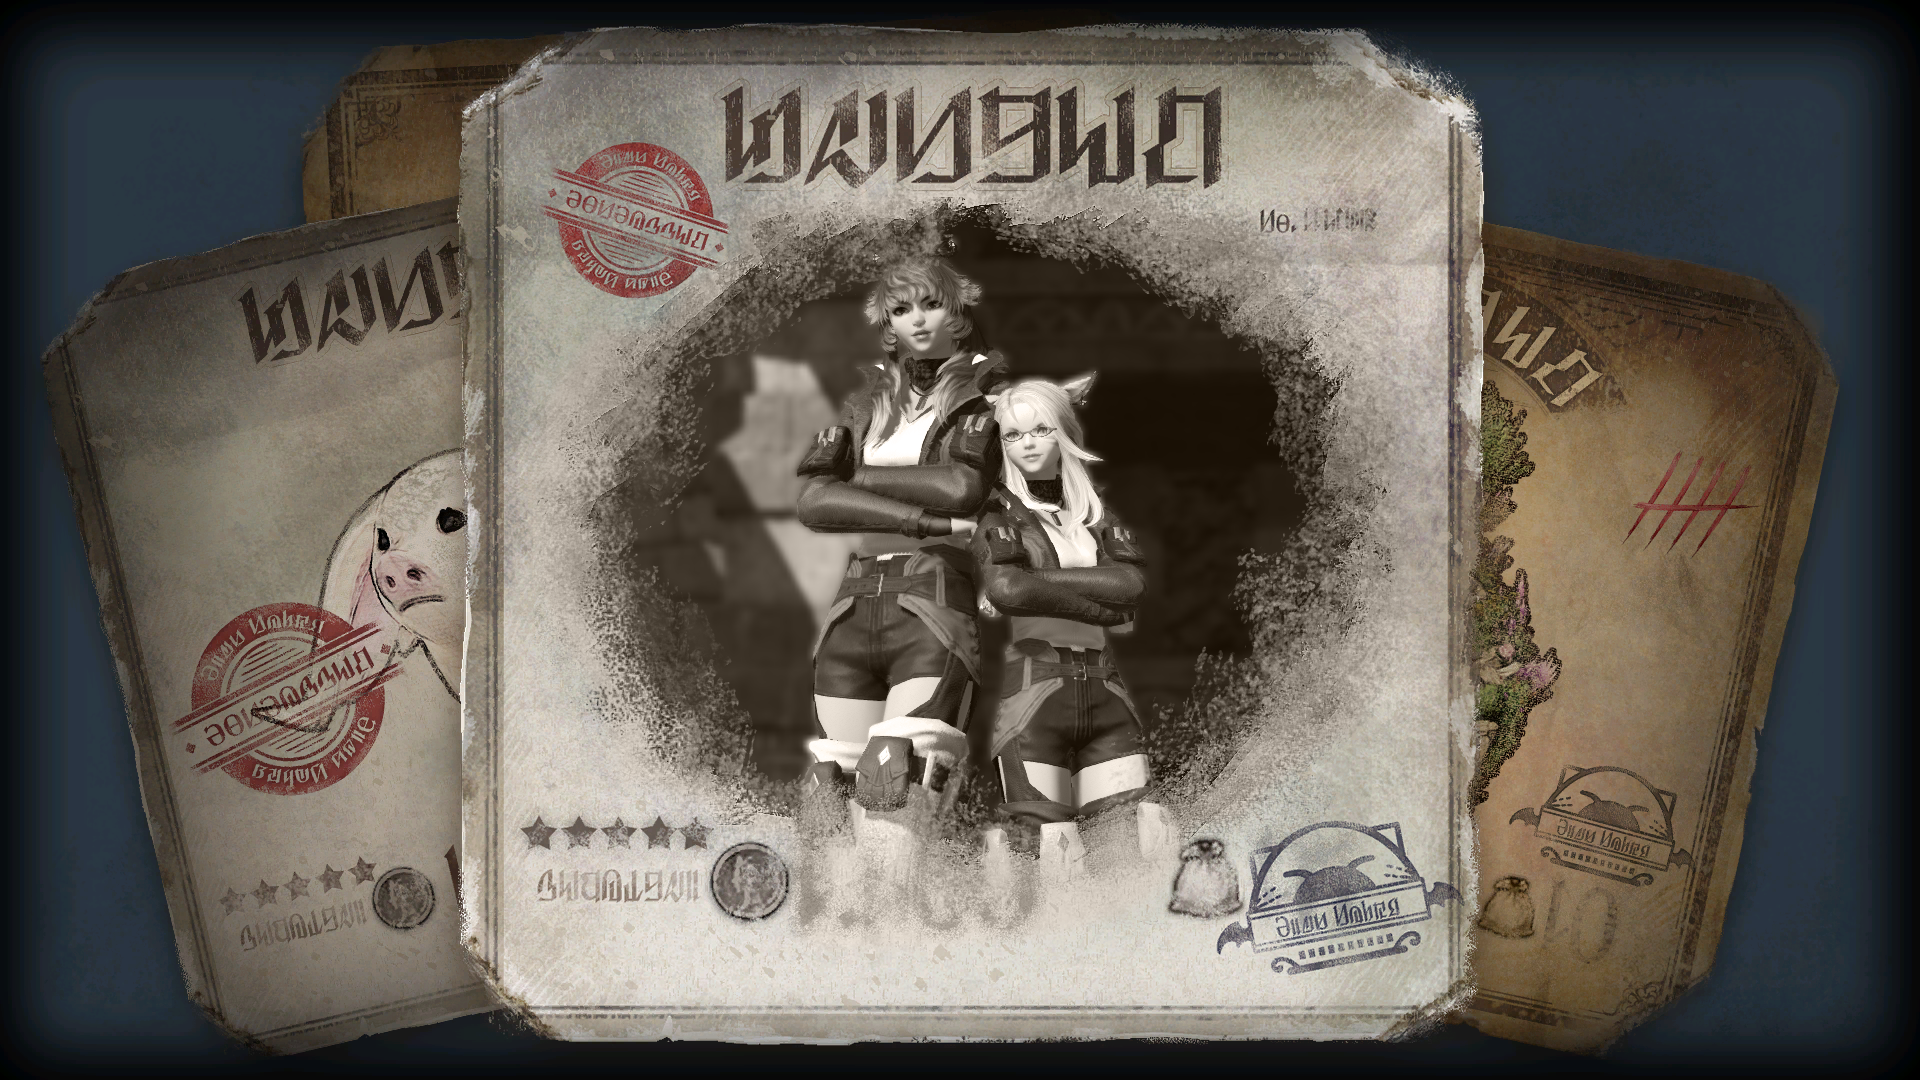 Aikirees and I on an old western-stylized wanted poster.